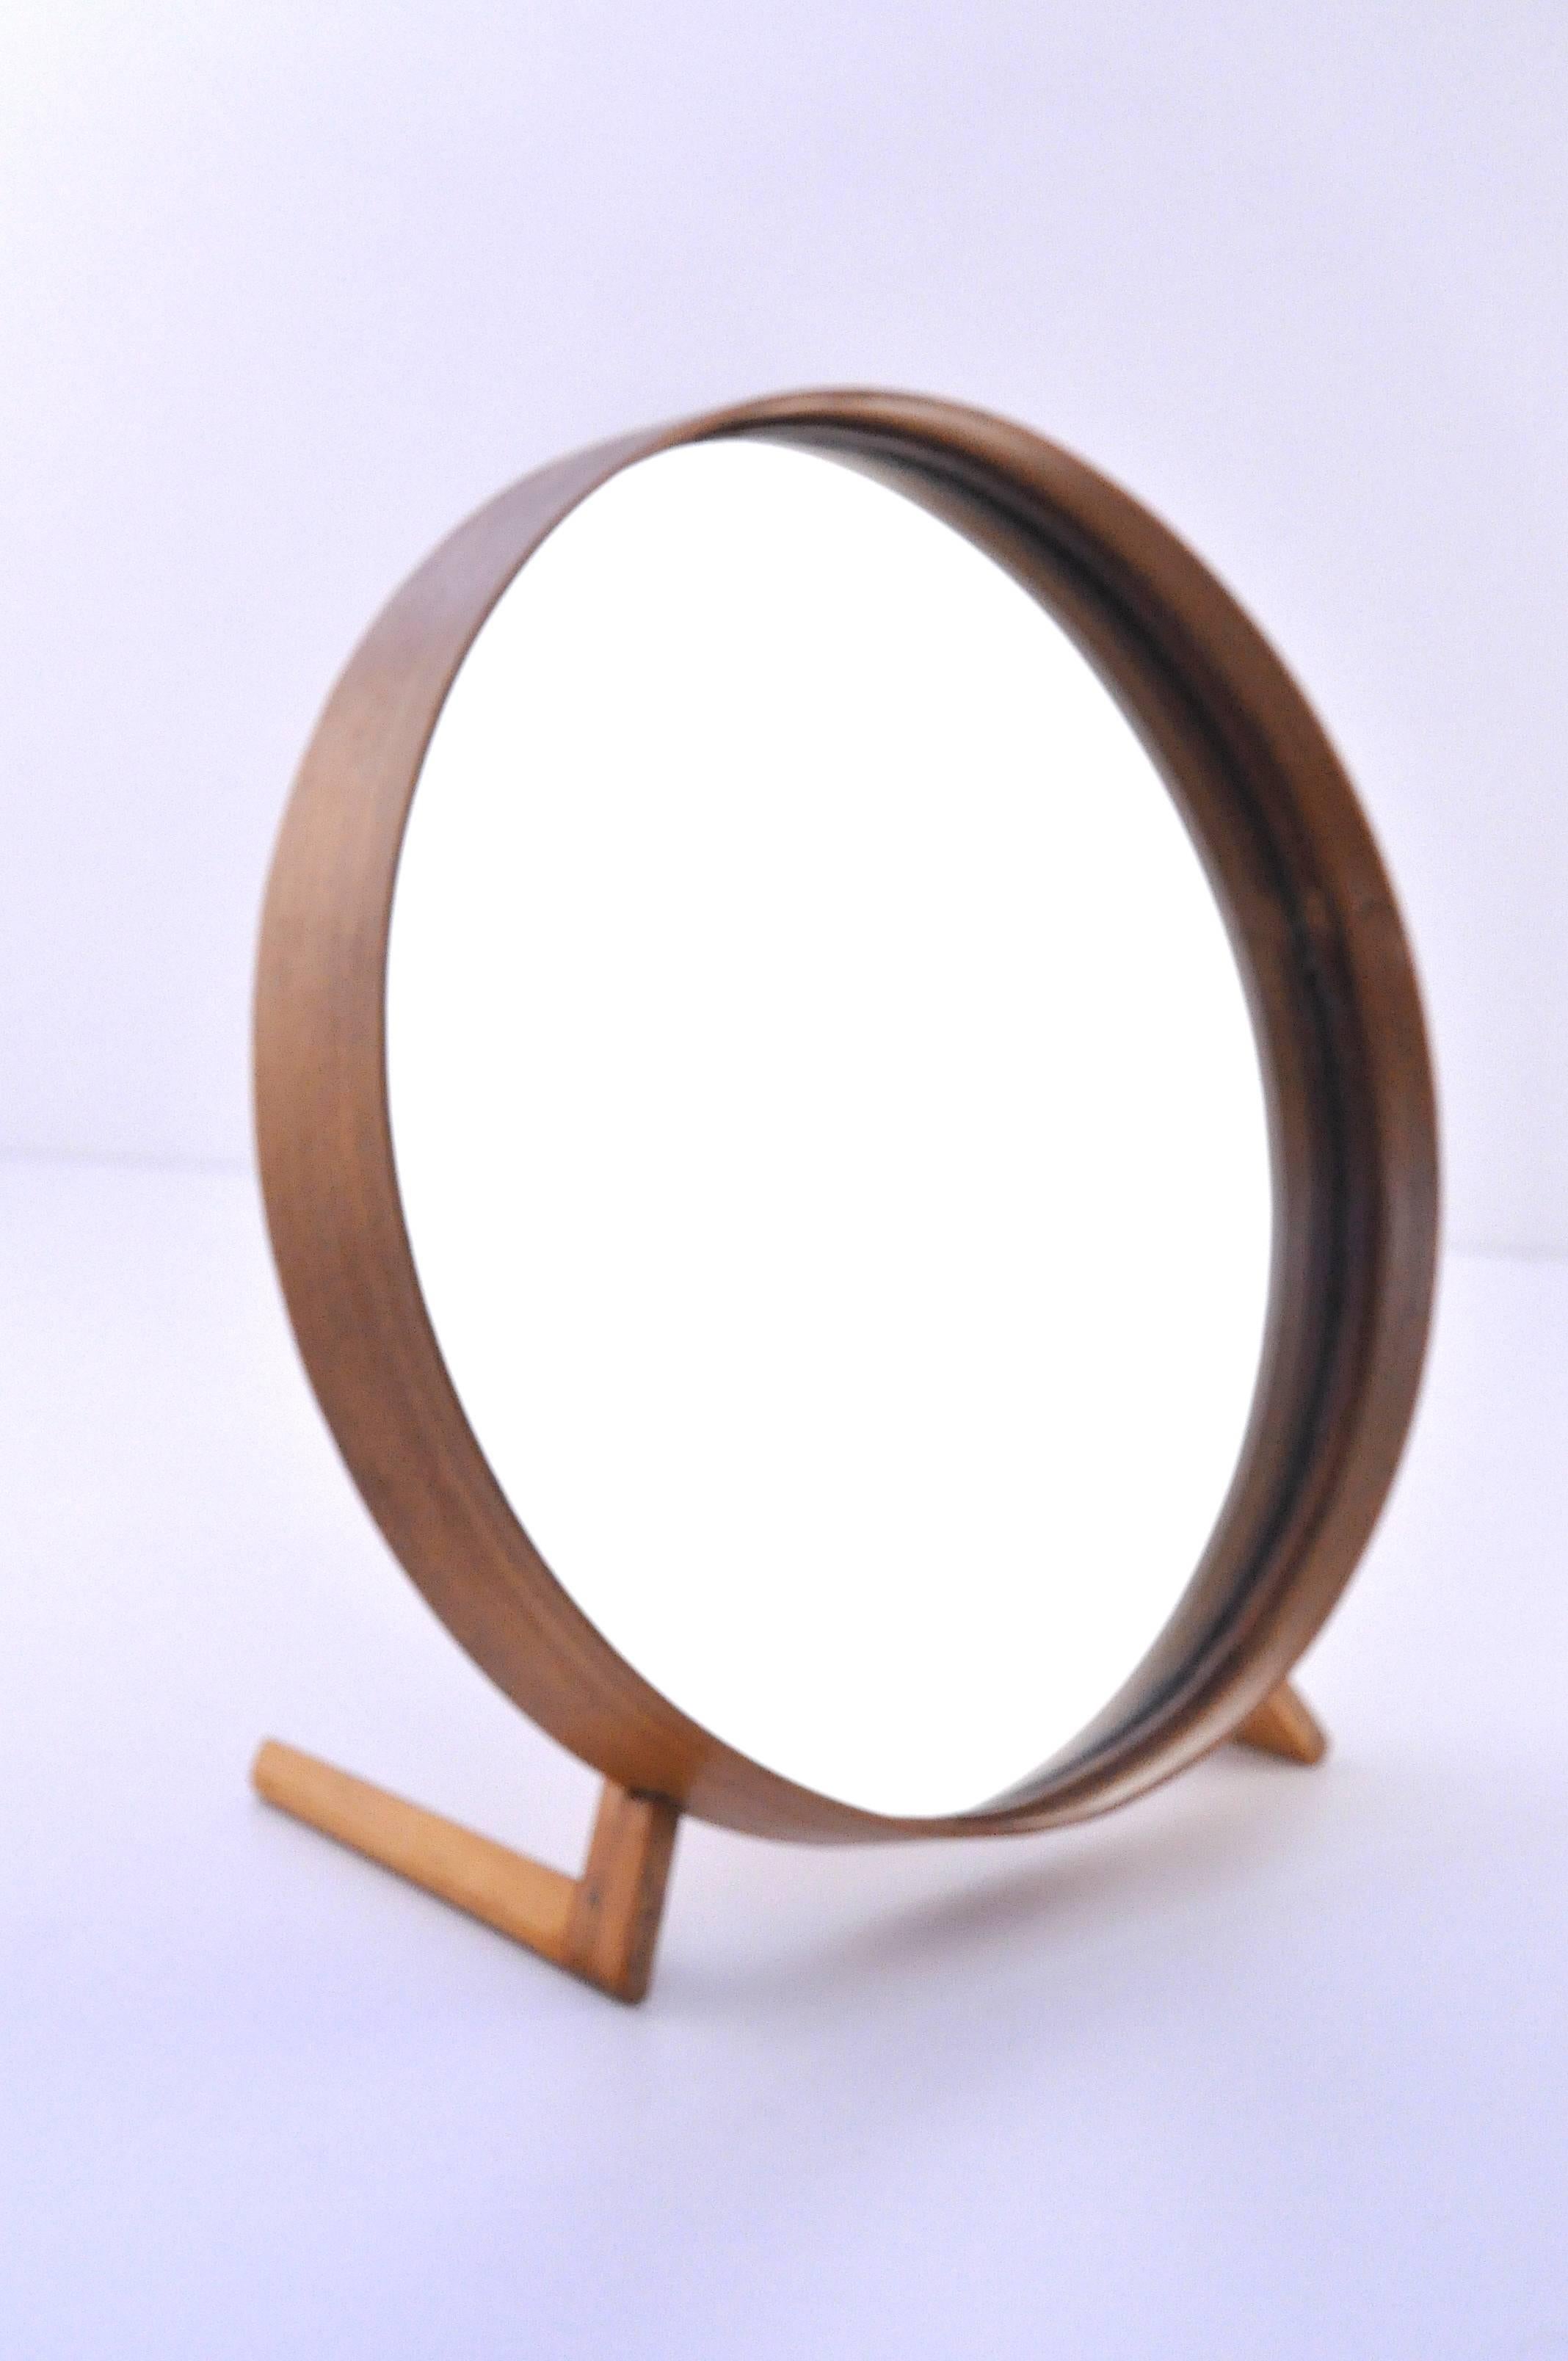 Table mirror by Uno & Osten Kristiansson for Luxus.
Depth: 5.51 inches (14 cm).
